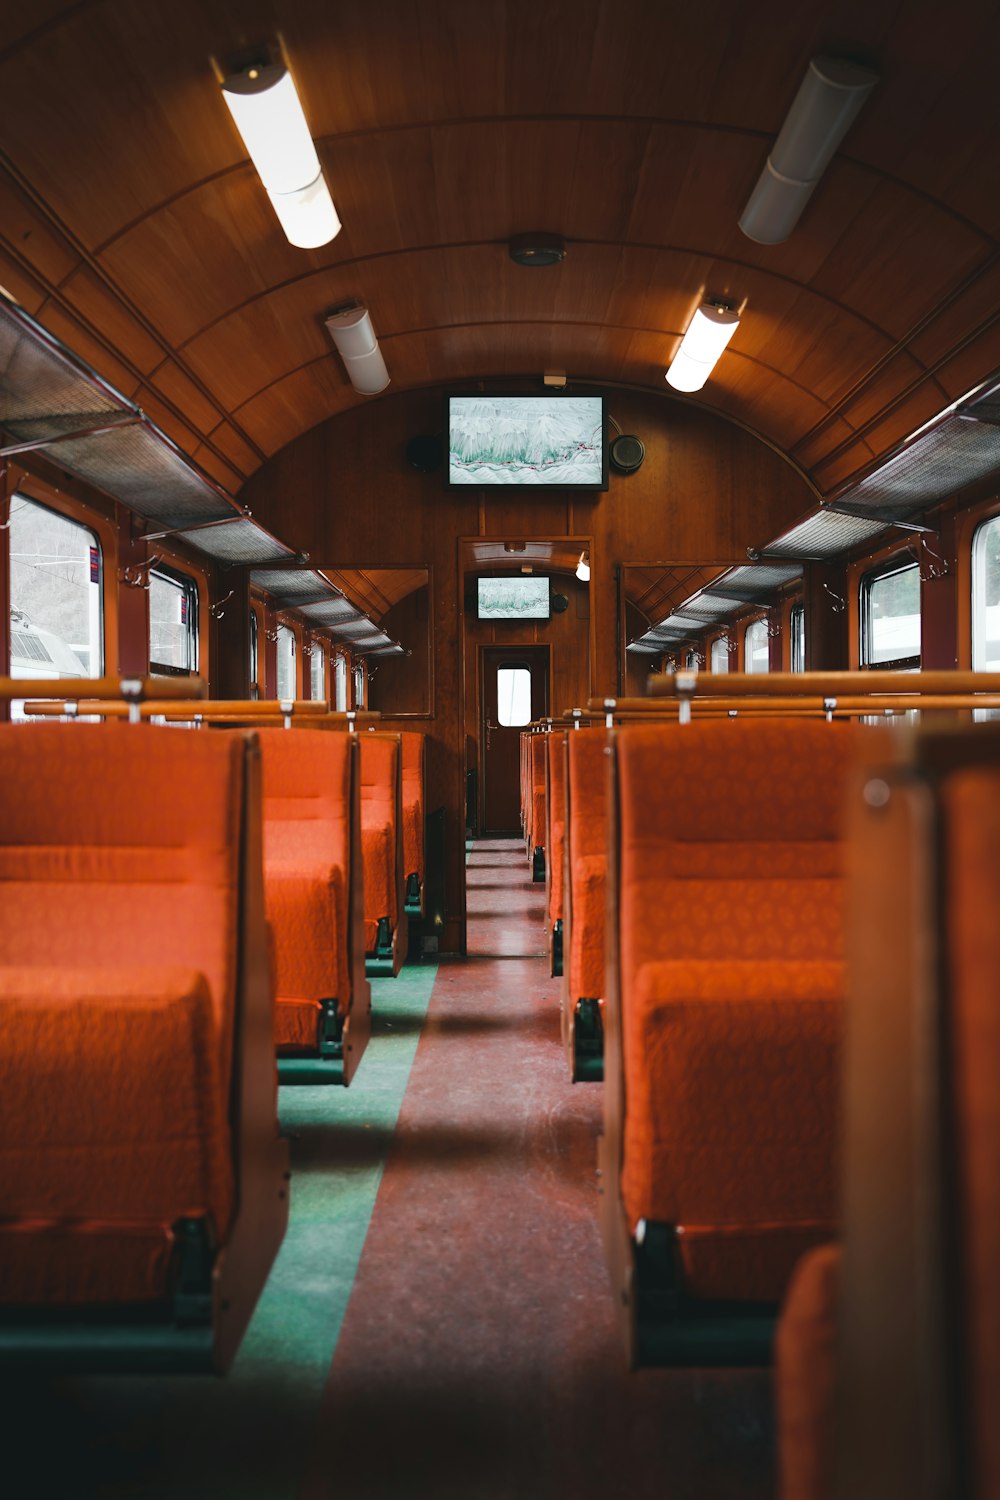 the inside of a train car with orange seats